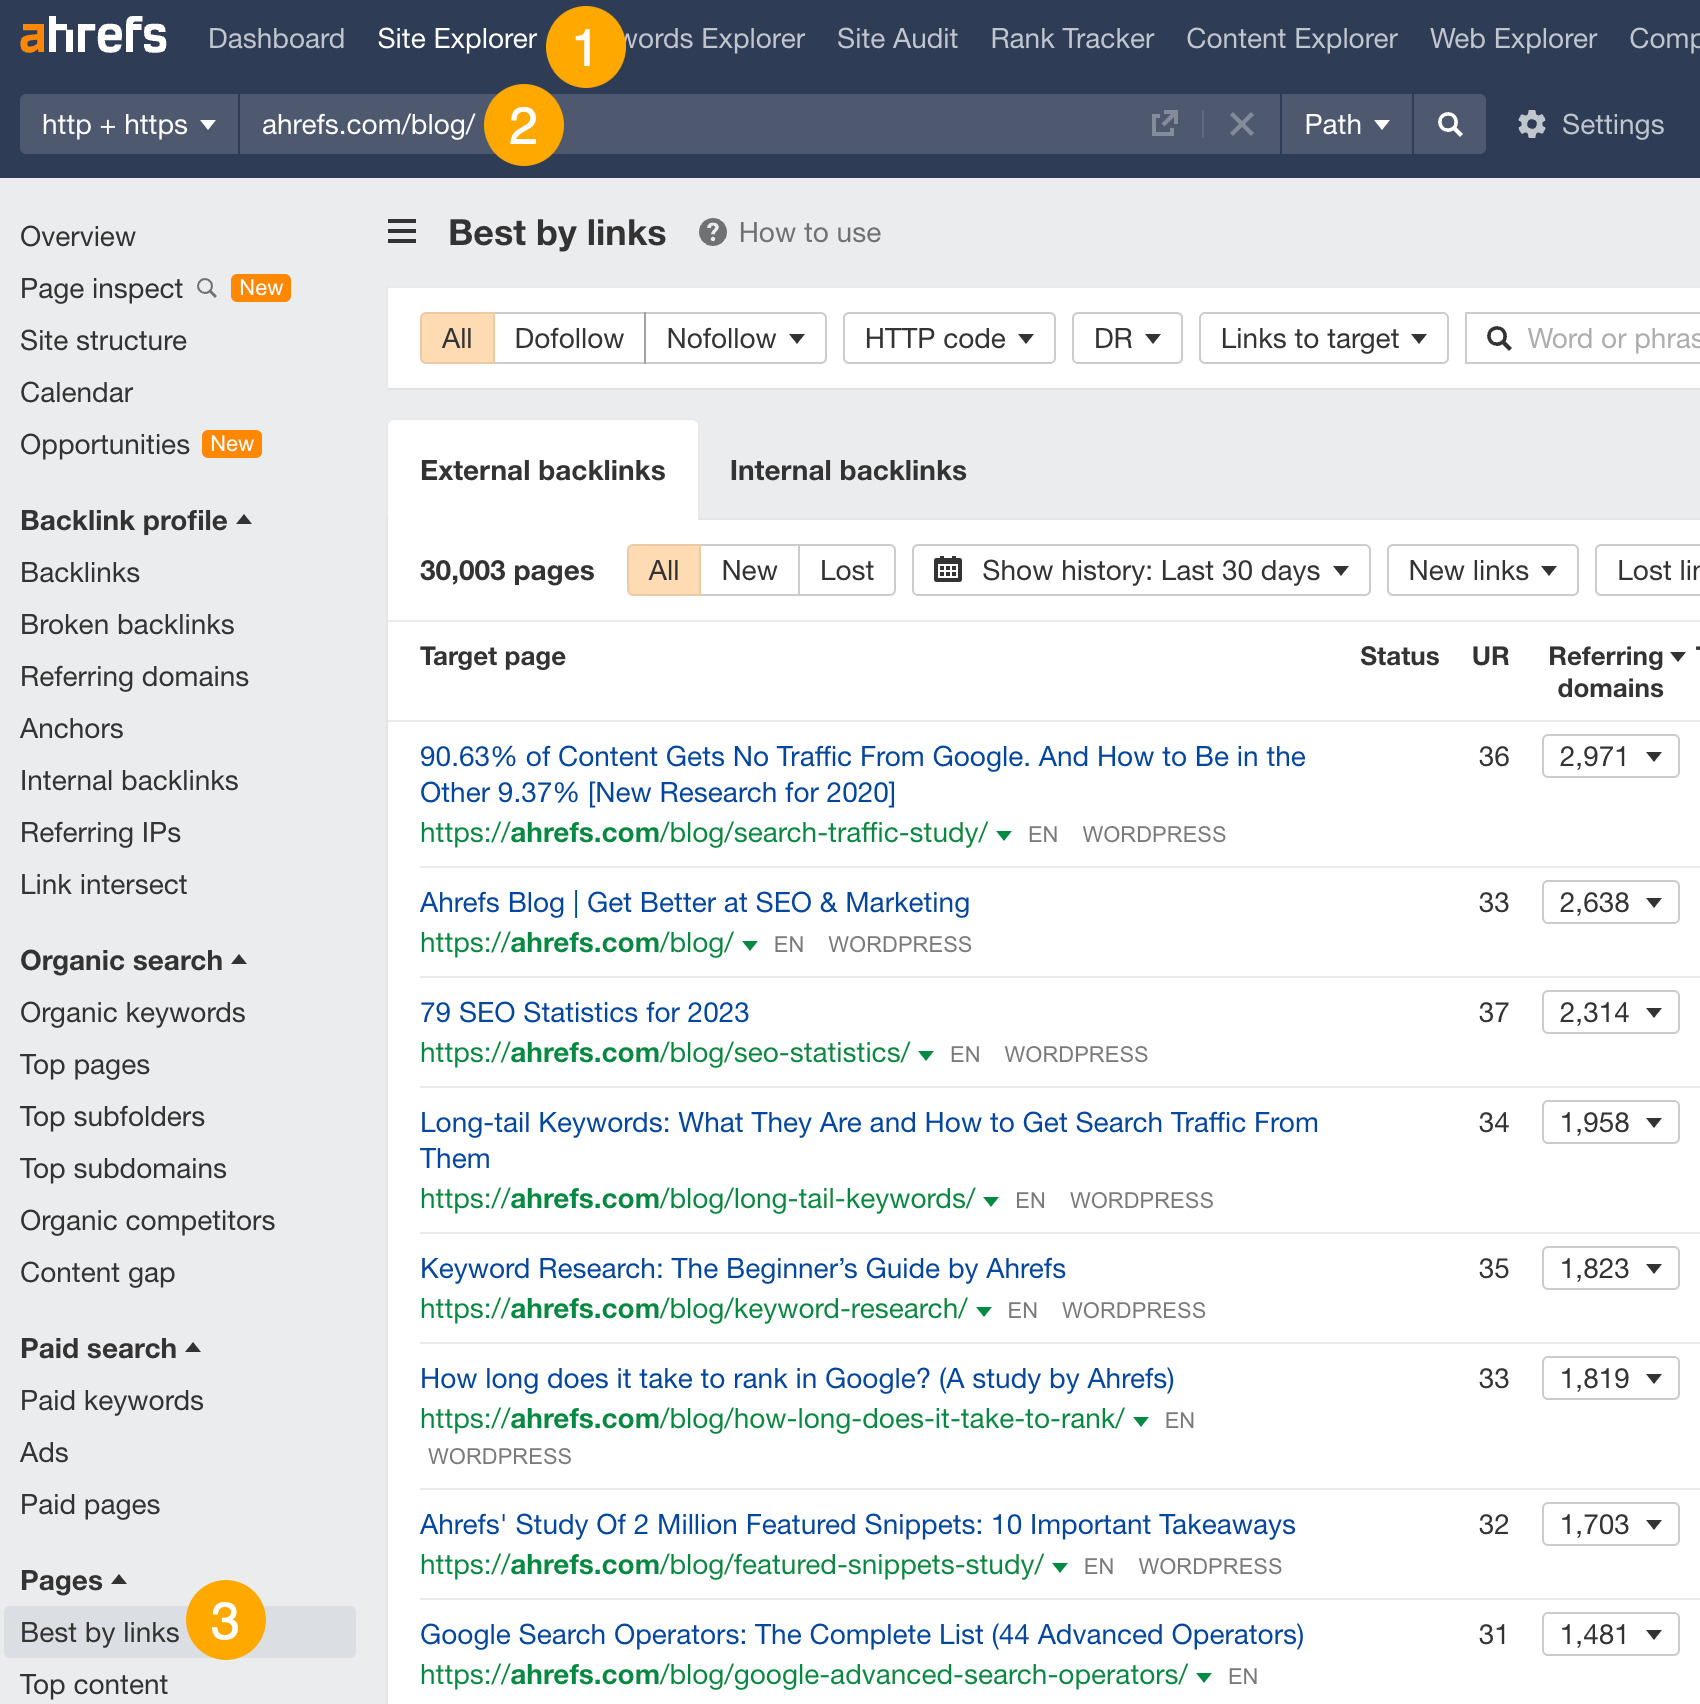 The most linked-to content on Ahrefs blog, via Ahrefs' Site Explorer